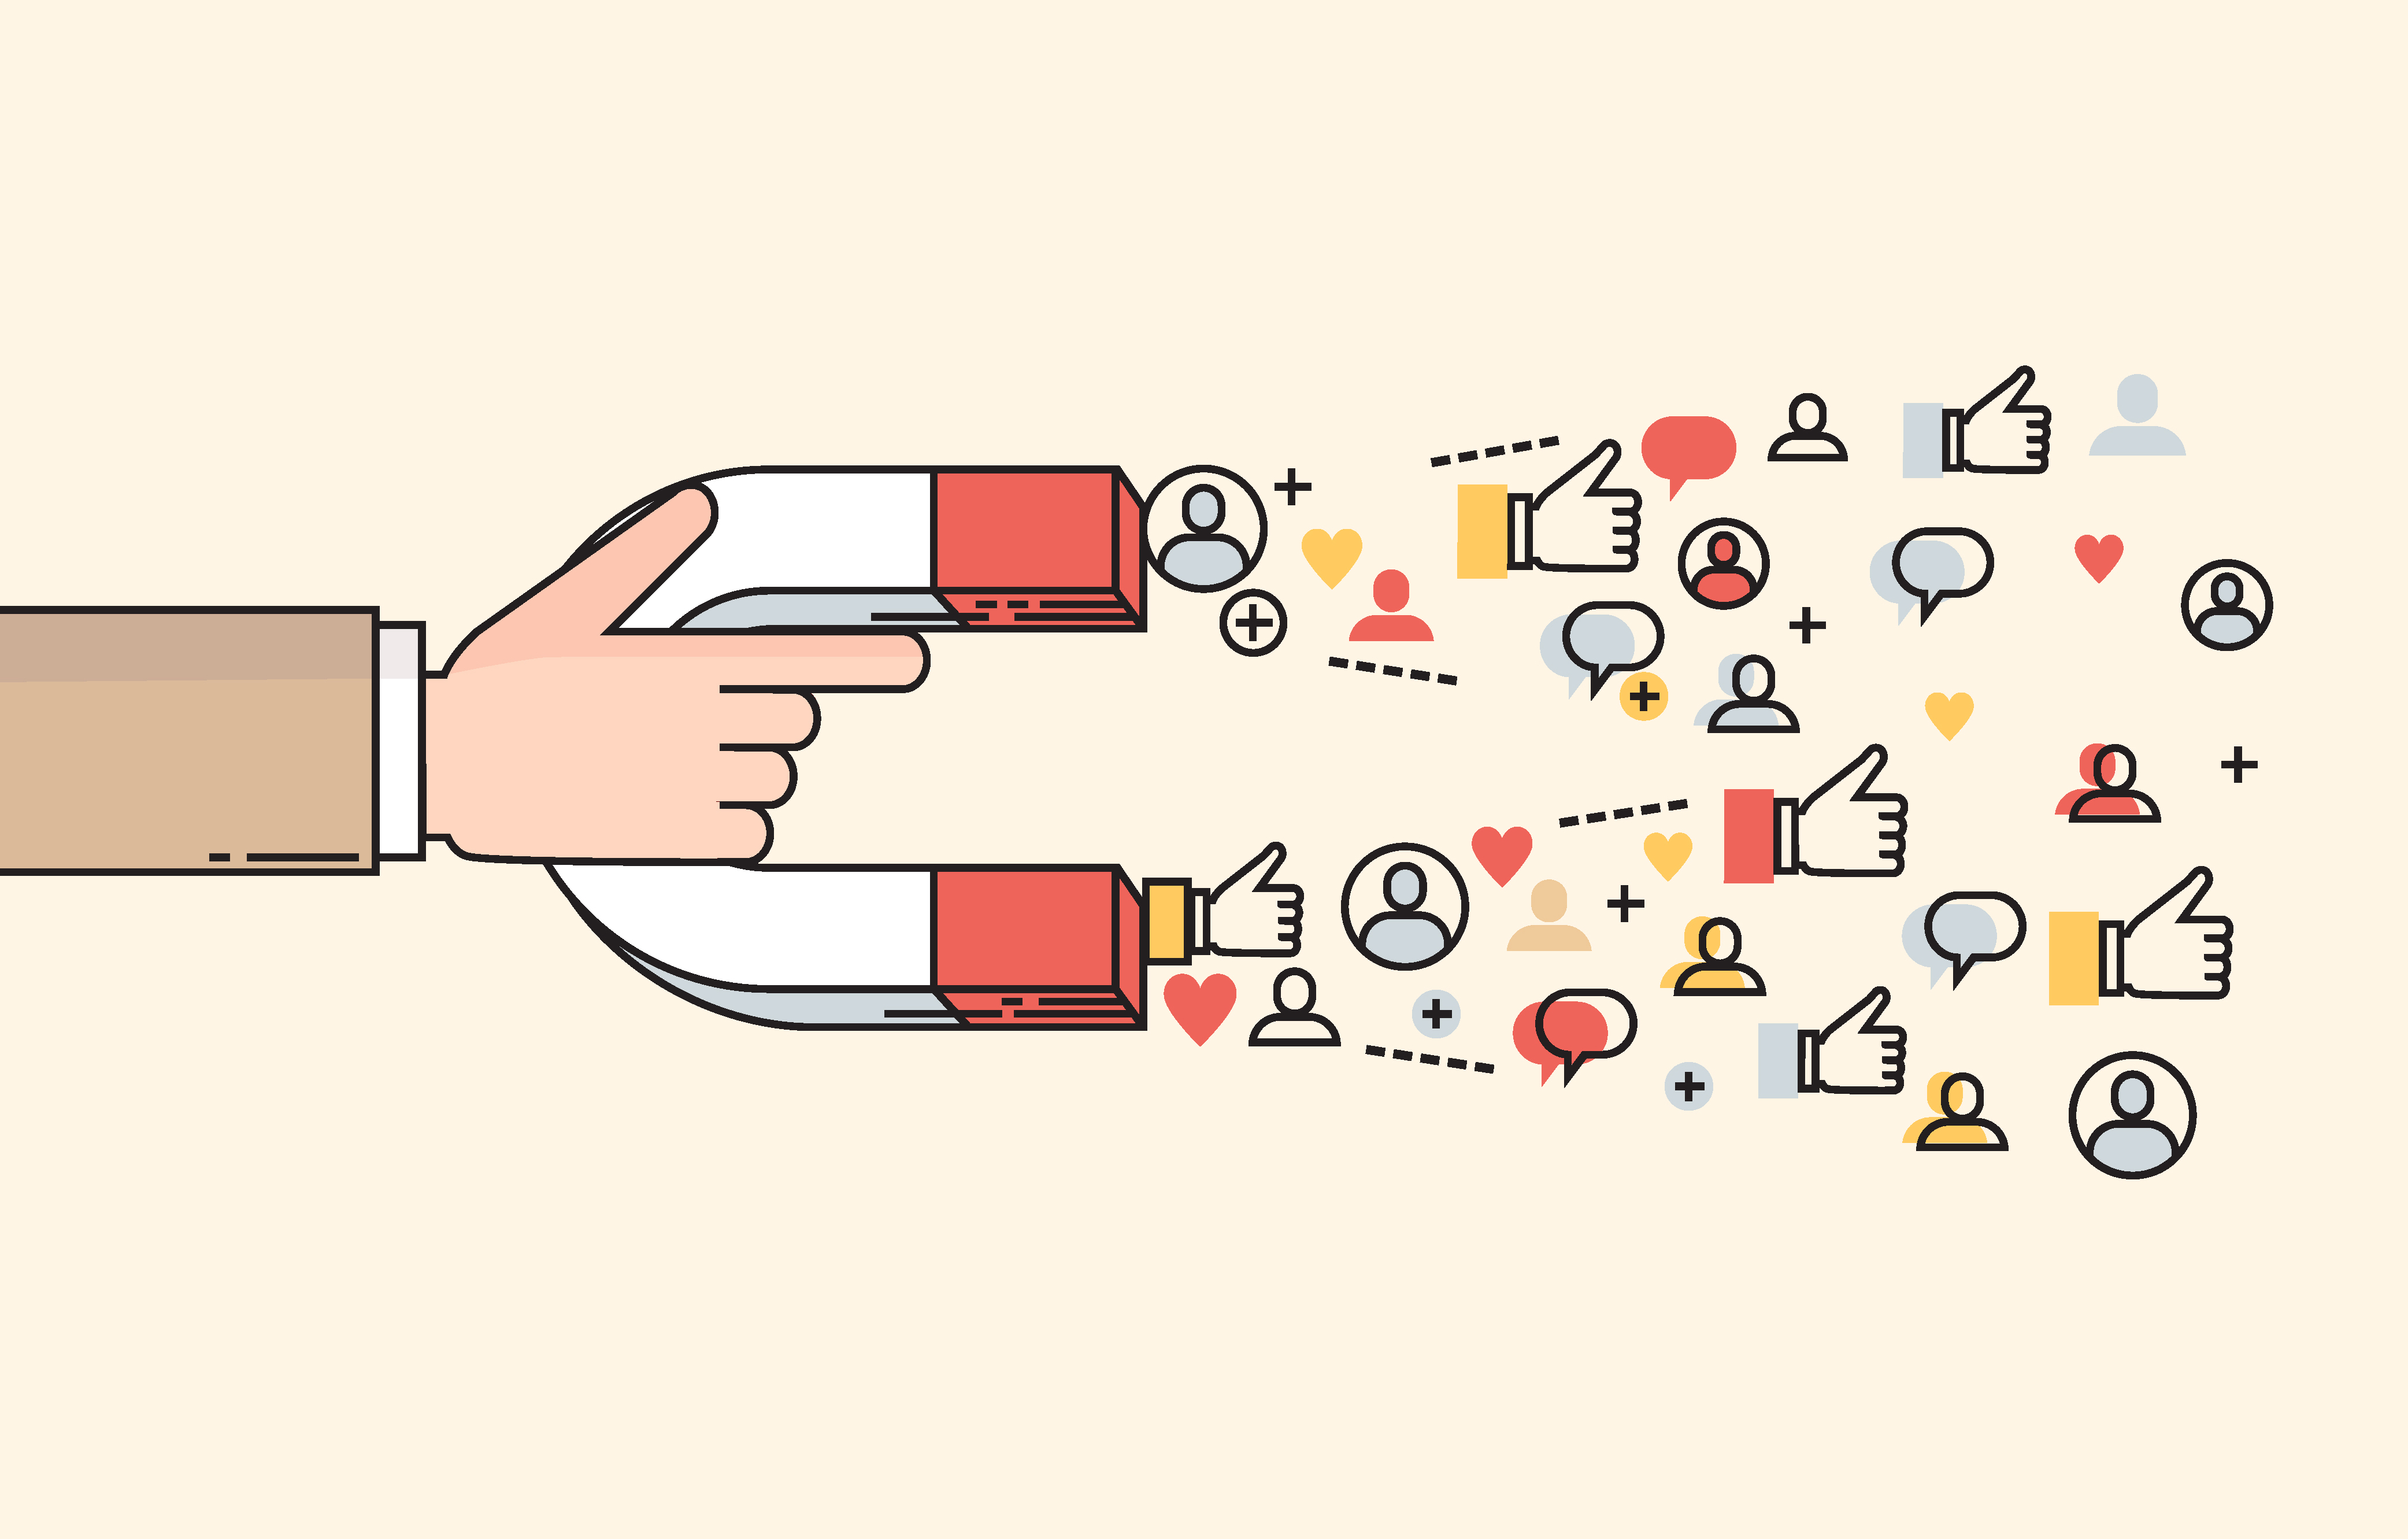 How to Build Connections with Influencers to Get Links, Shares, and Exposure